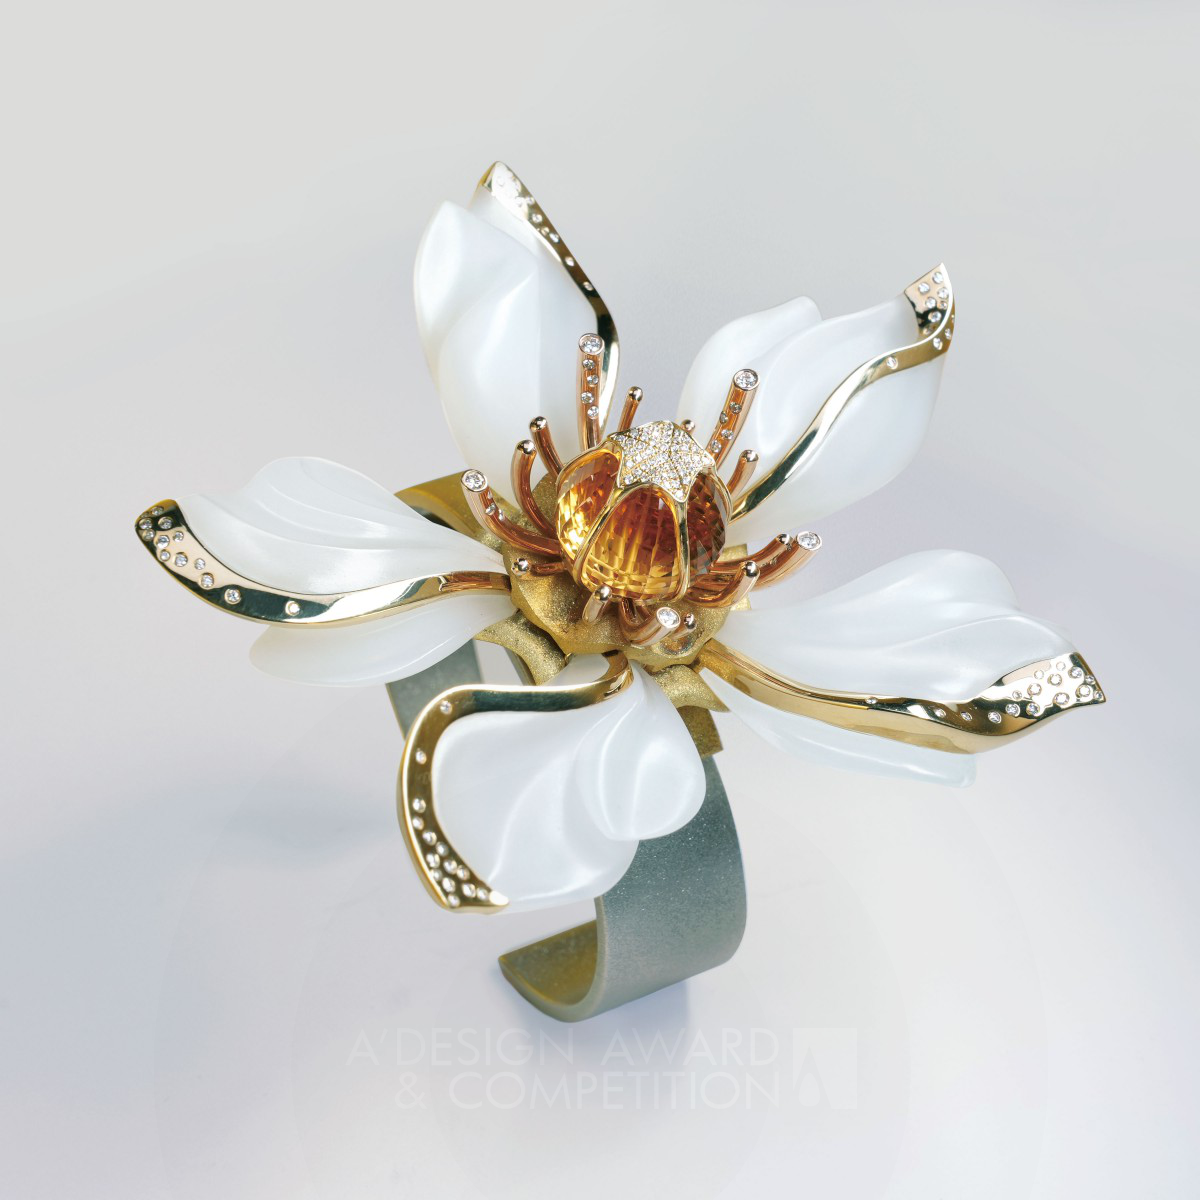 Blooming Blossom Multiwear Jewelry by Xincheng Zhang